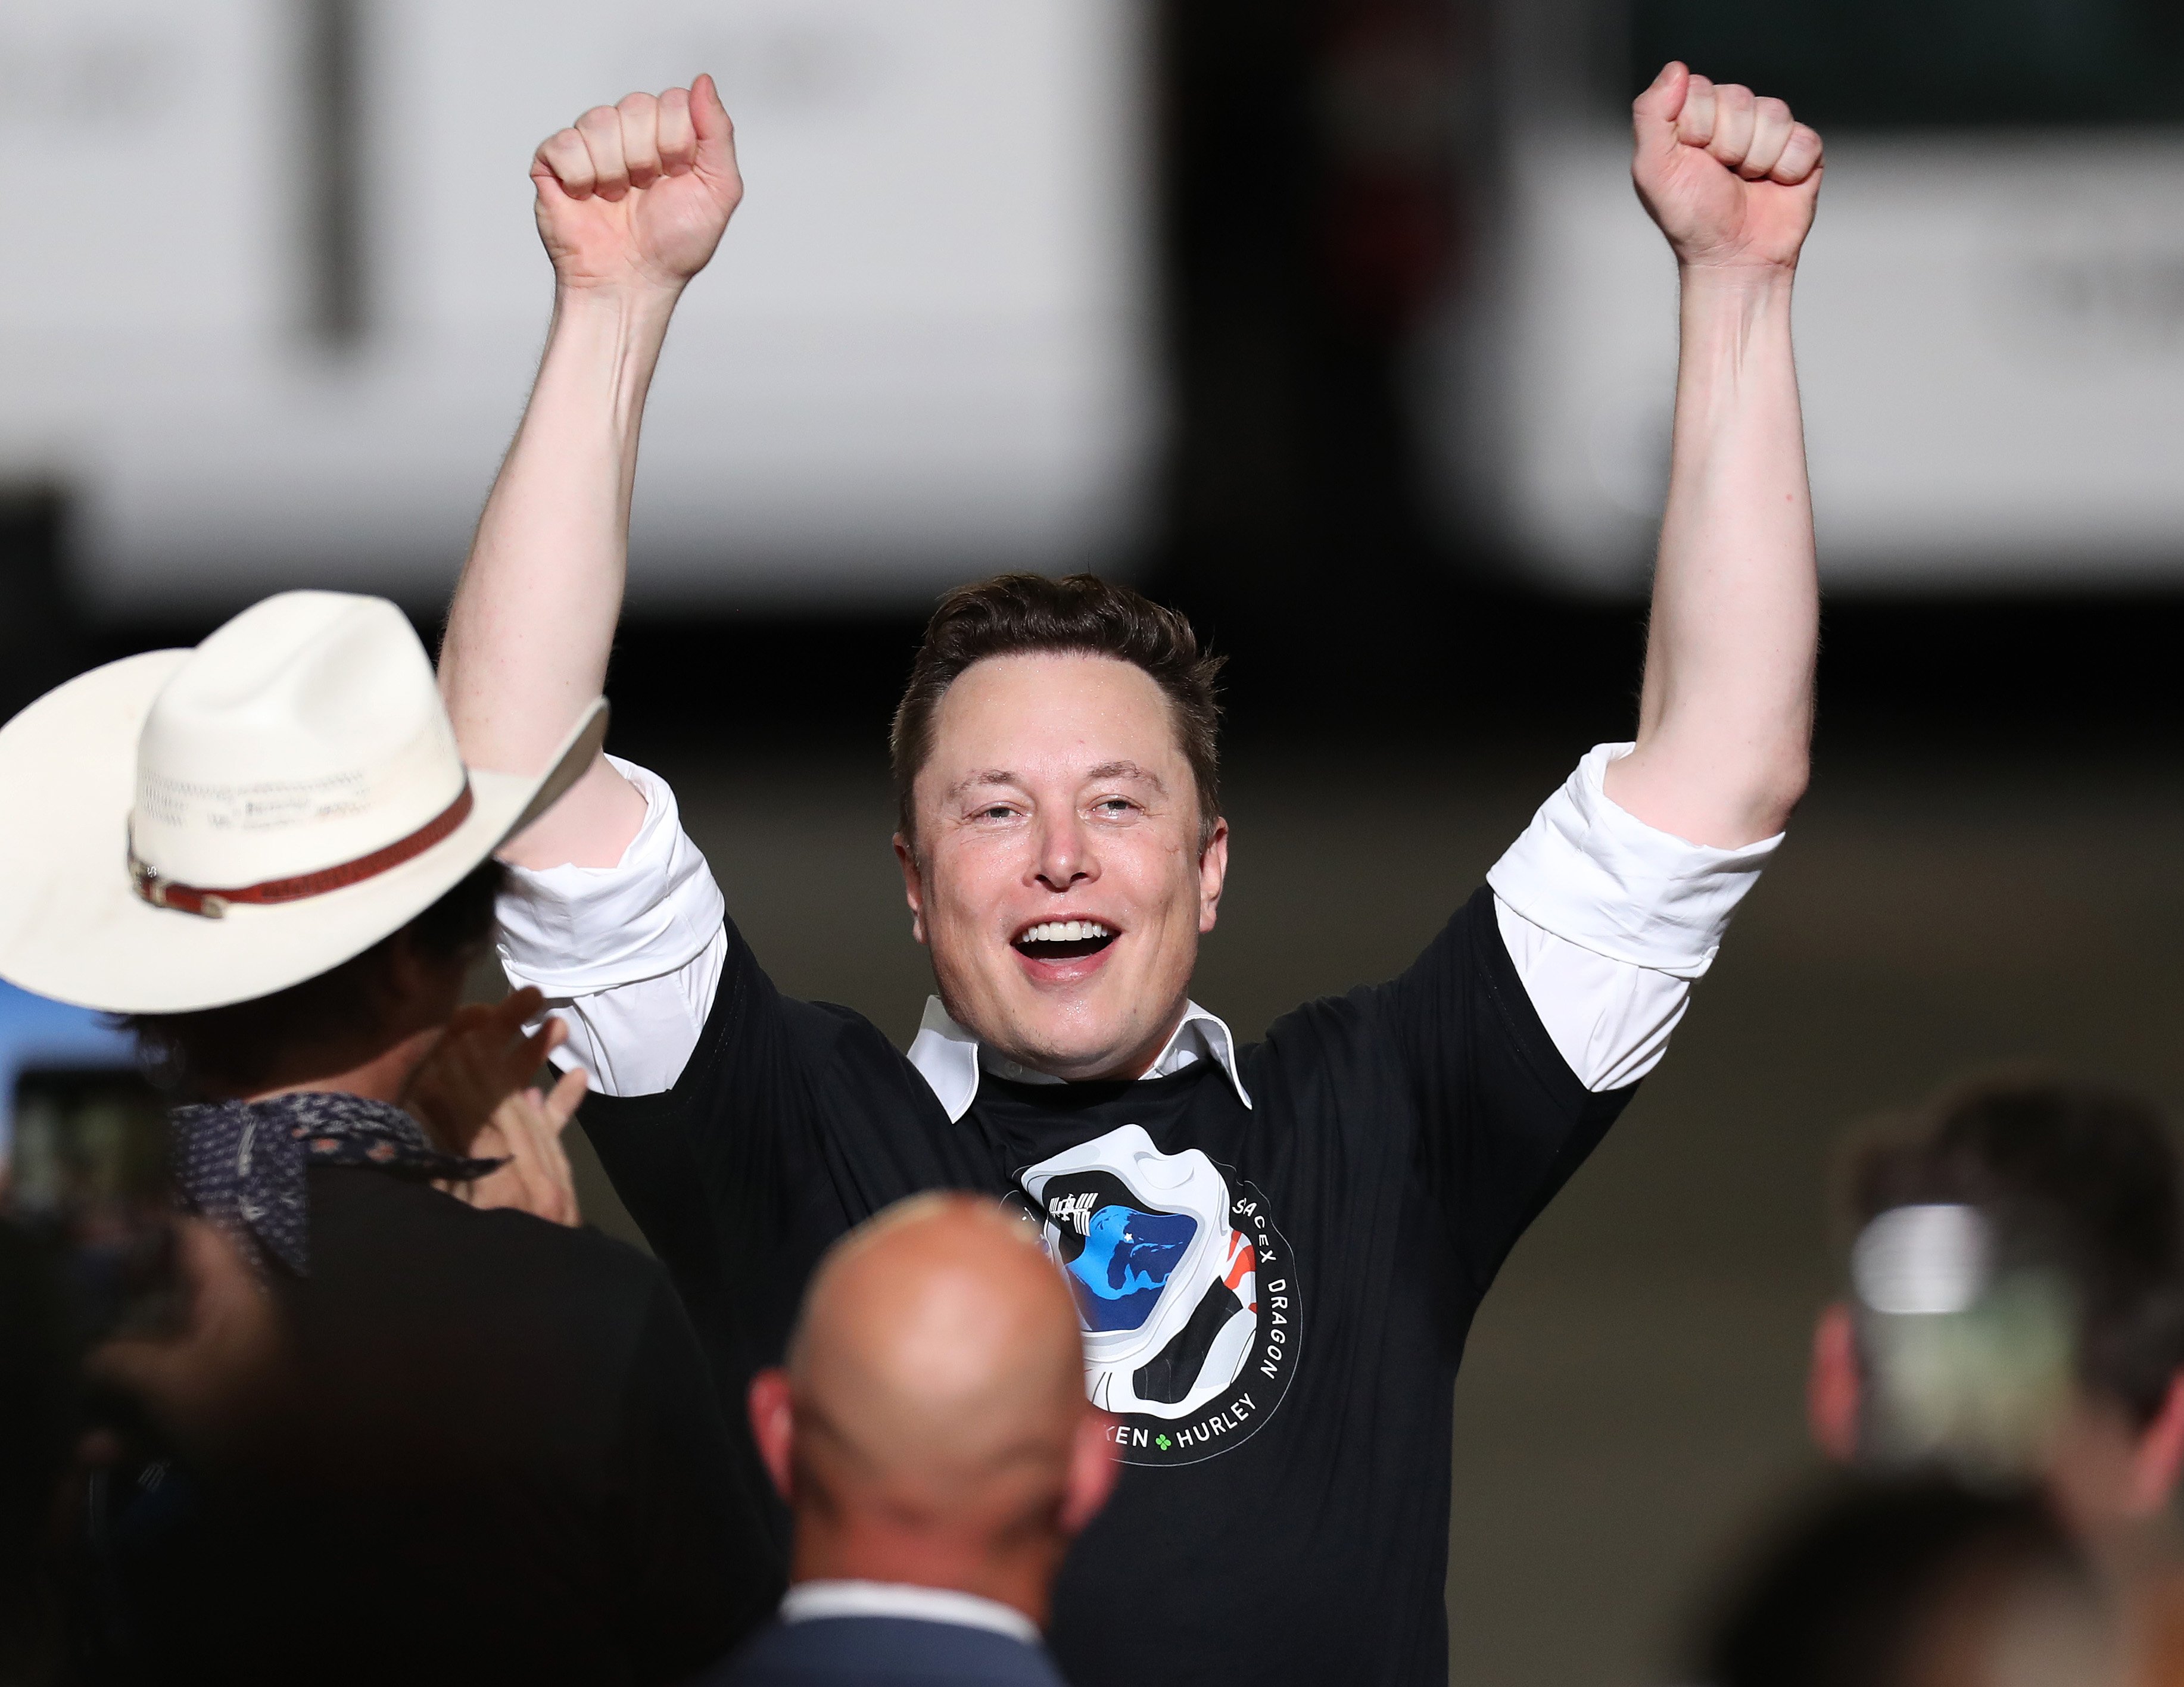 Elon Musk celebrates after the successful launch of the SpaceX Falcon 9 rocket with the manned Crew Dragon spacecraft on May 30, 2020, in Cape Canaveral, Florida. | Source: Getty Images